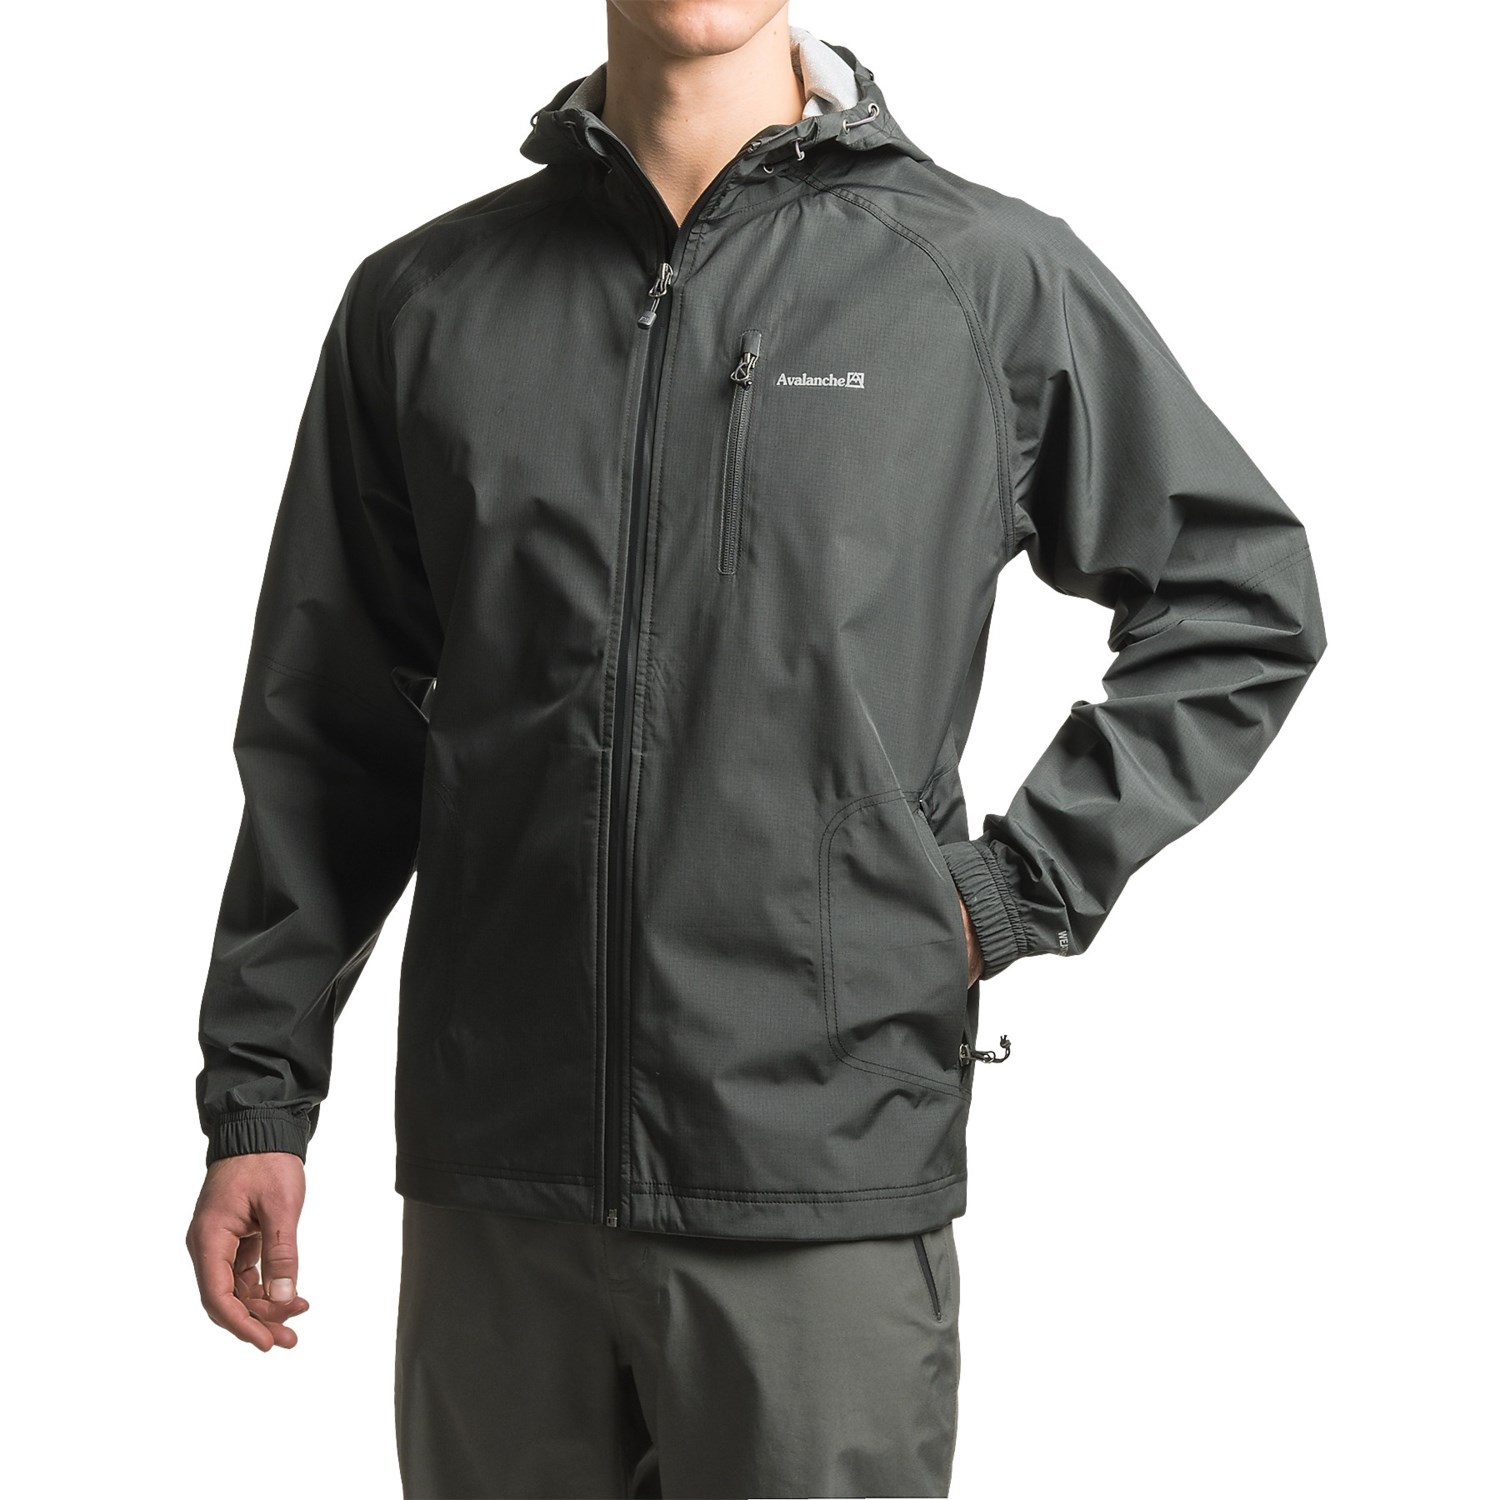 Avalanche Wear Sentinel Hooded Rain Jacket (For Men) - Save 37%